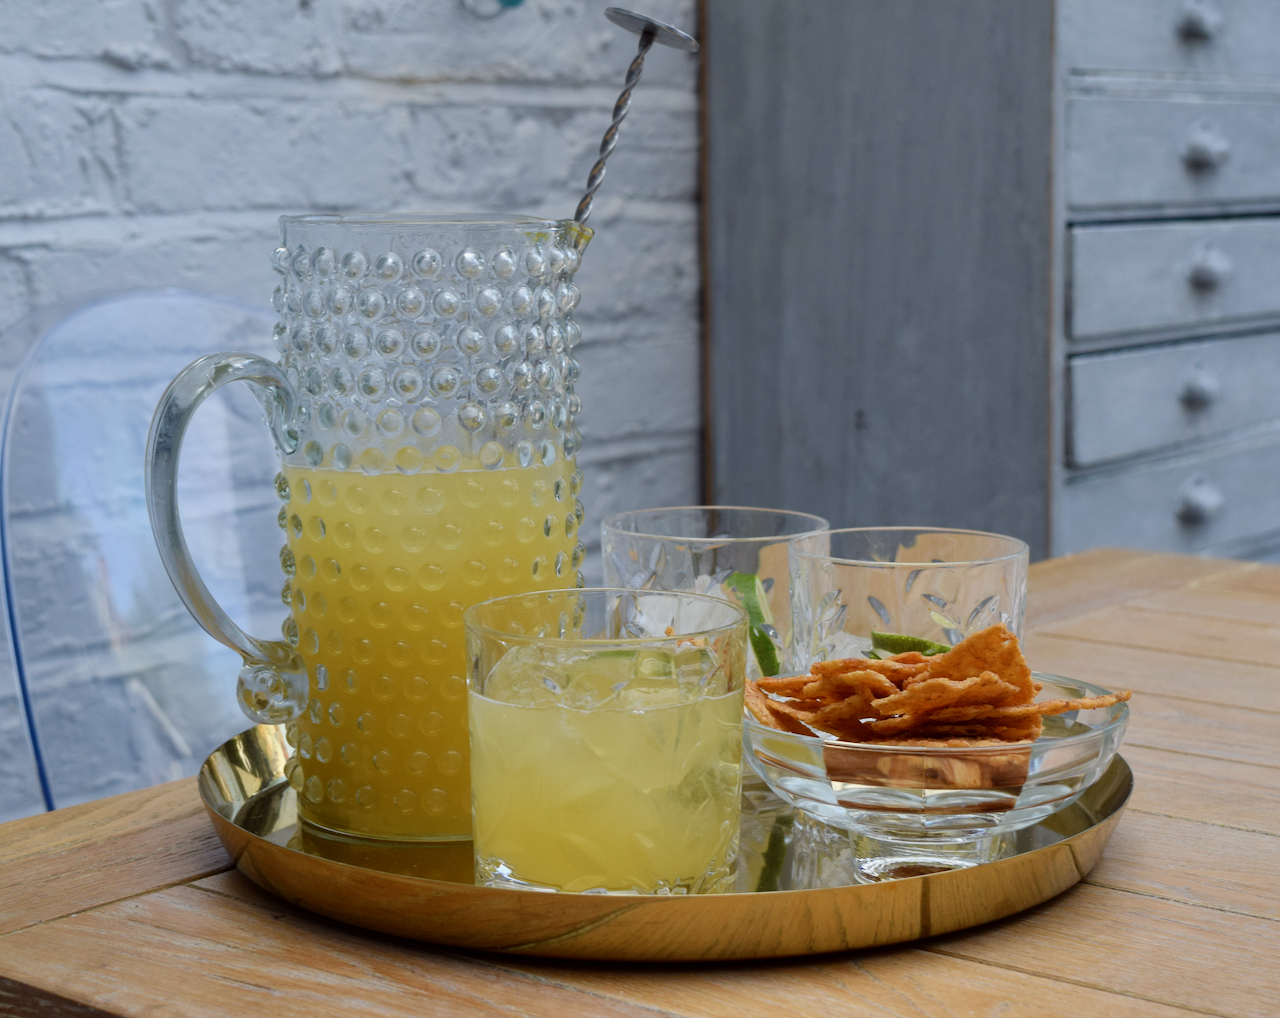 Pineapple Rum Punch recipe from Lucy Loves Food Blog